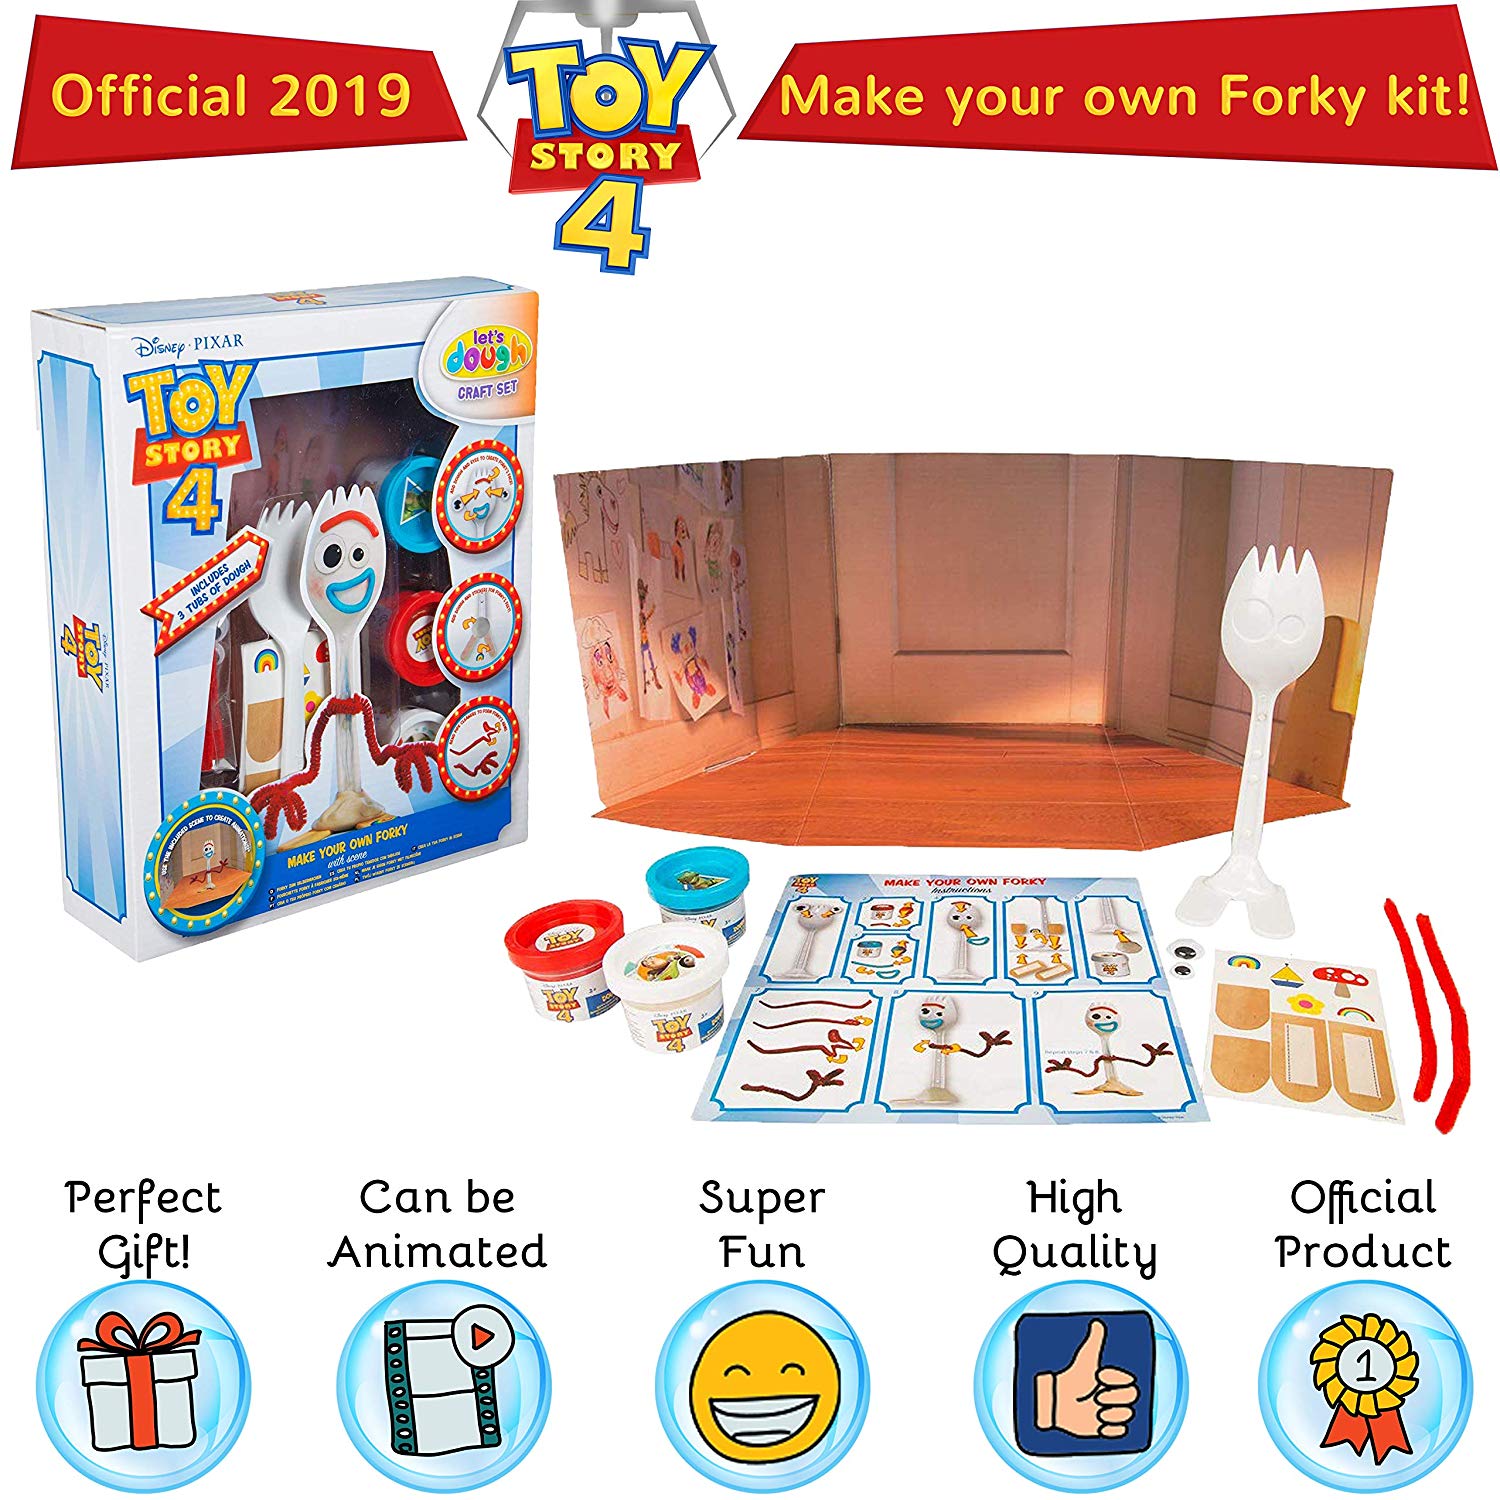 Forky Disney Pixar Toy Story 4 Make Your Own Forky Kit Creative Craft Kids Gift